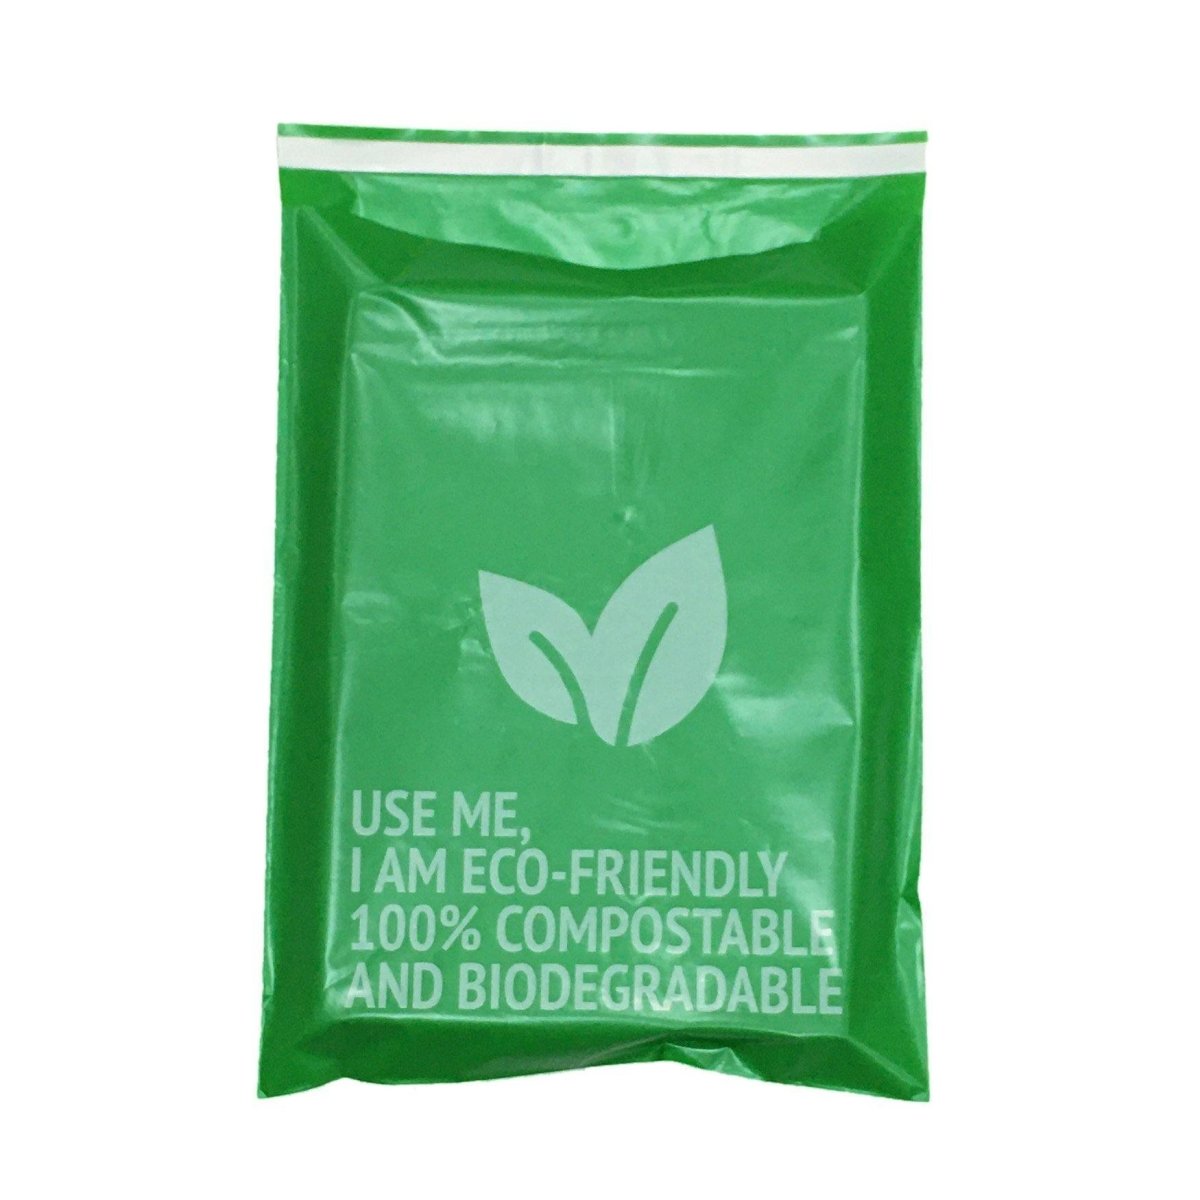 Compostable Mailer 01 190mm x 260mm Eco